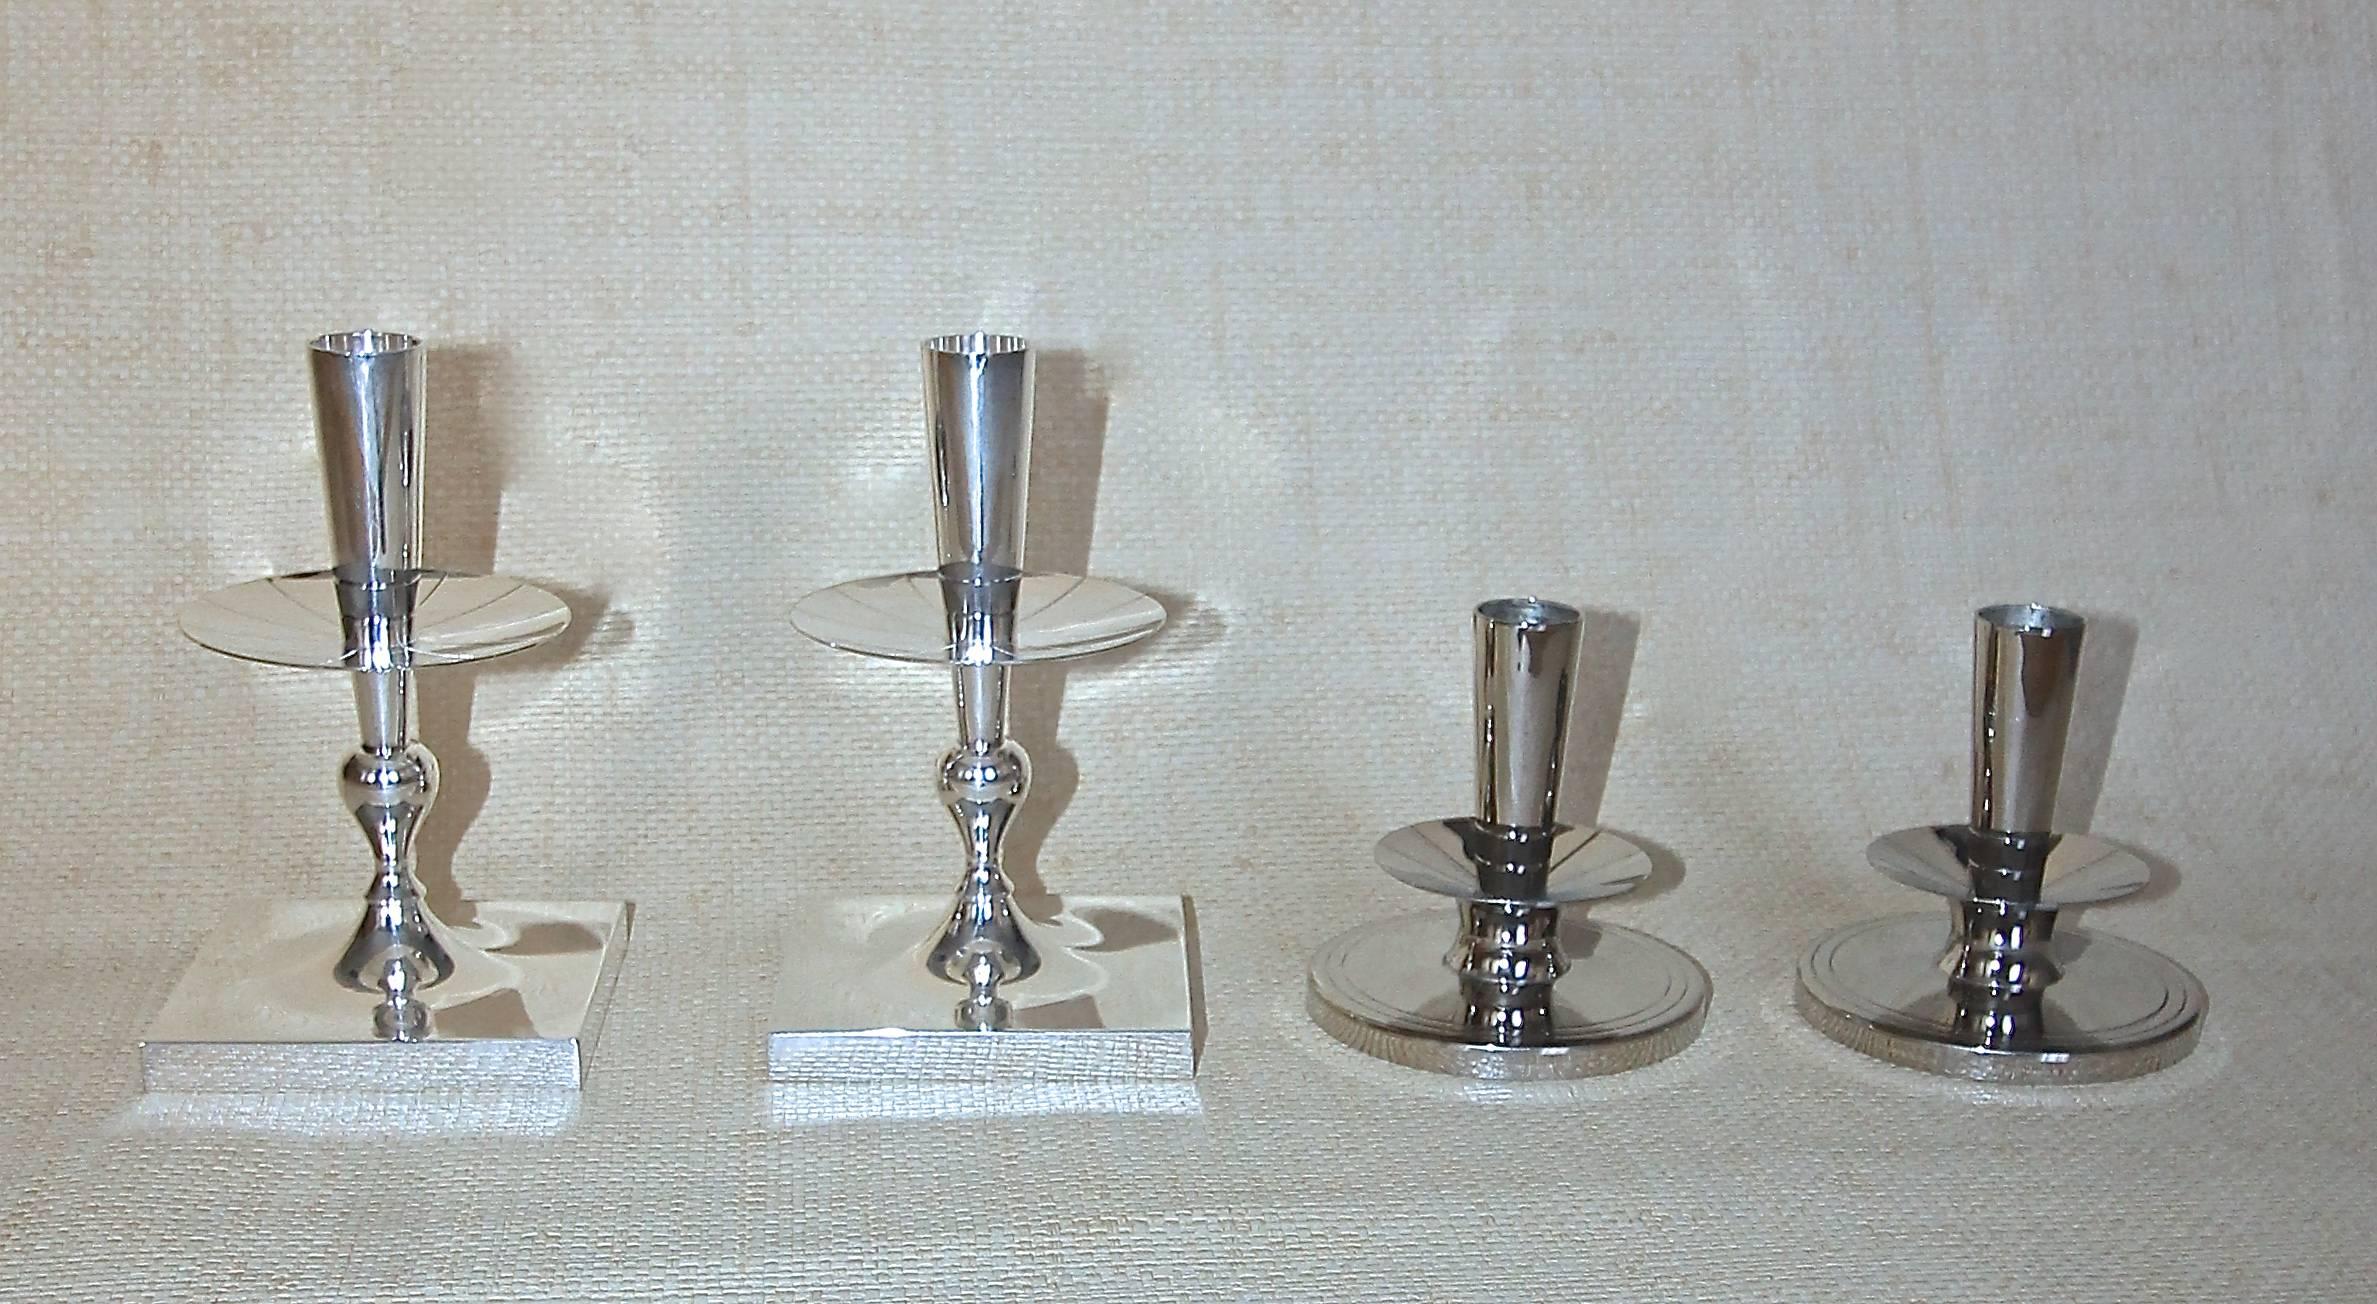 A collection of Tommi Parzinger designed candlesticks. Available for purchase separately.

Left pair: 7" tall x 4" wide in Silver-plated brass marked "Made by Dorlyn Silversmiths PR"  $650
Right pair: 4" tall x 4"